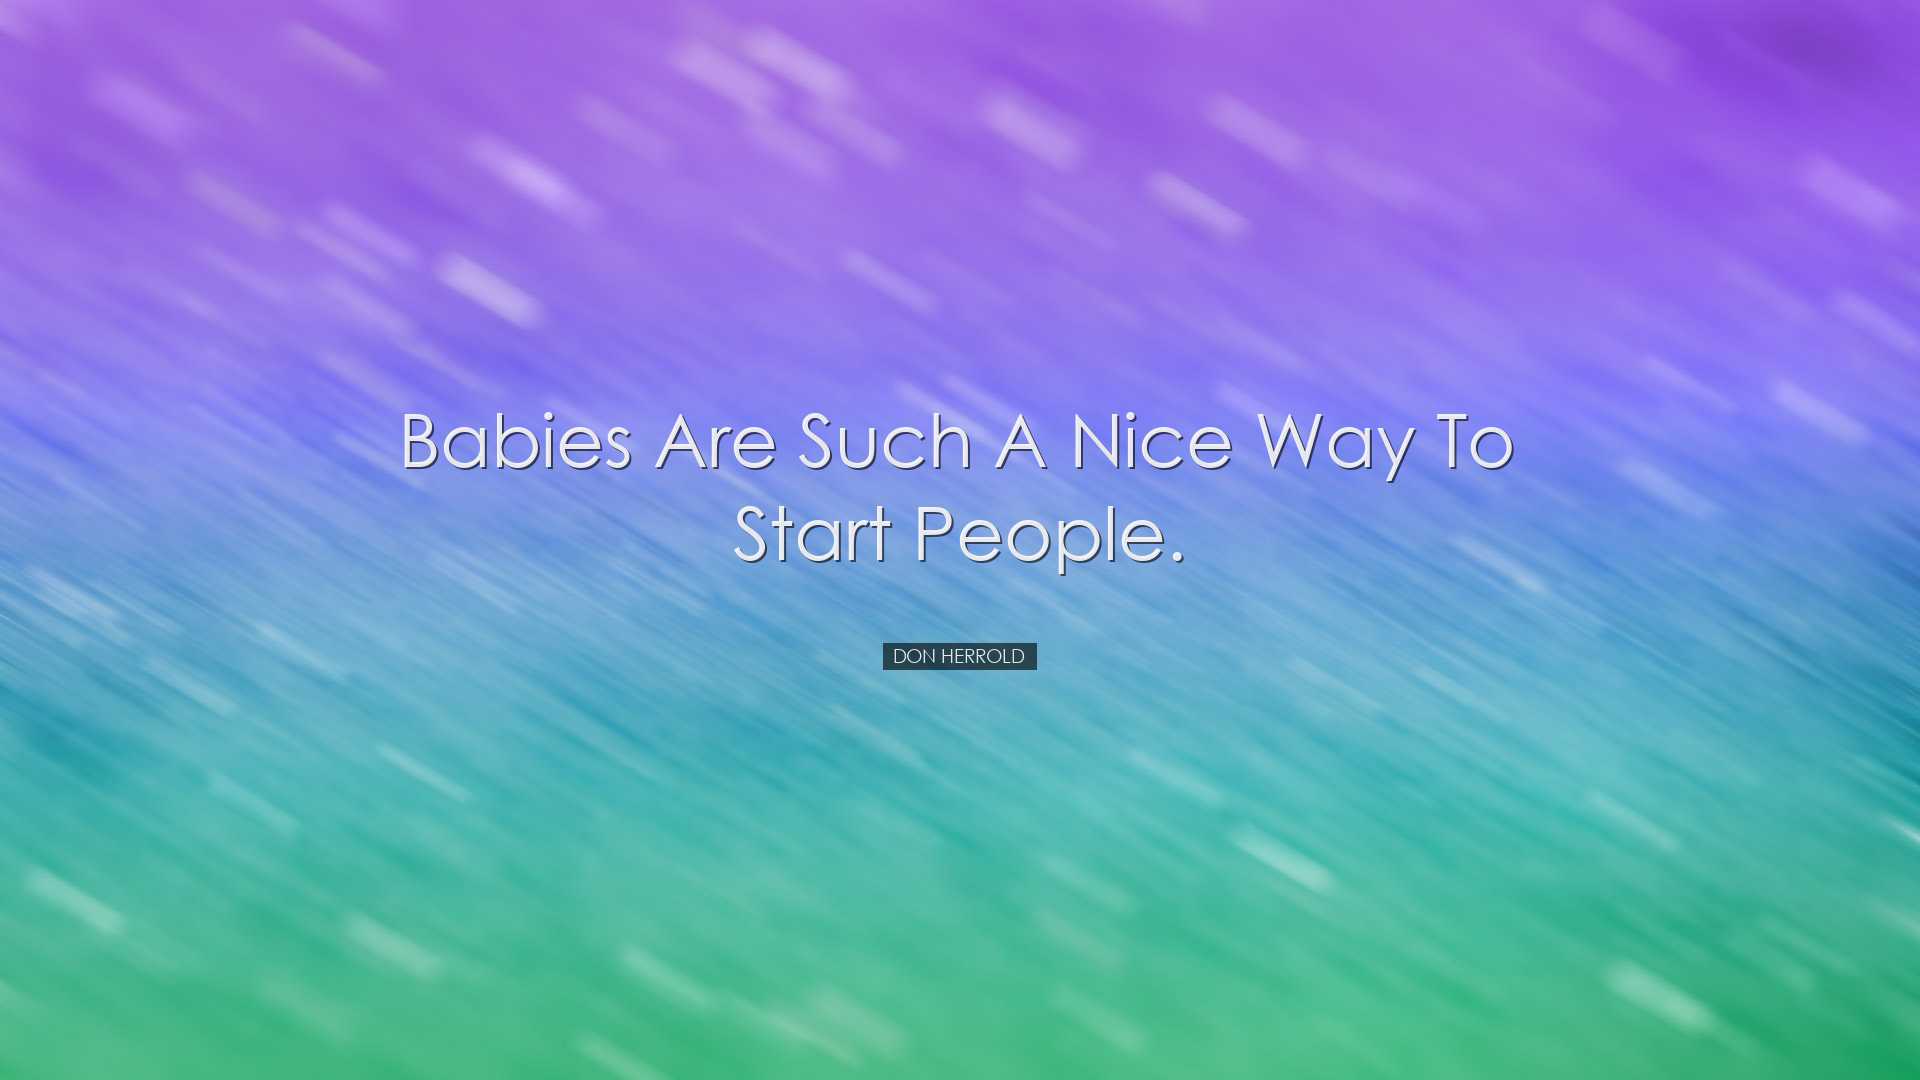 Babies are such a nice way to start people. - Don Herrold